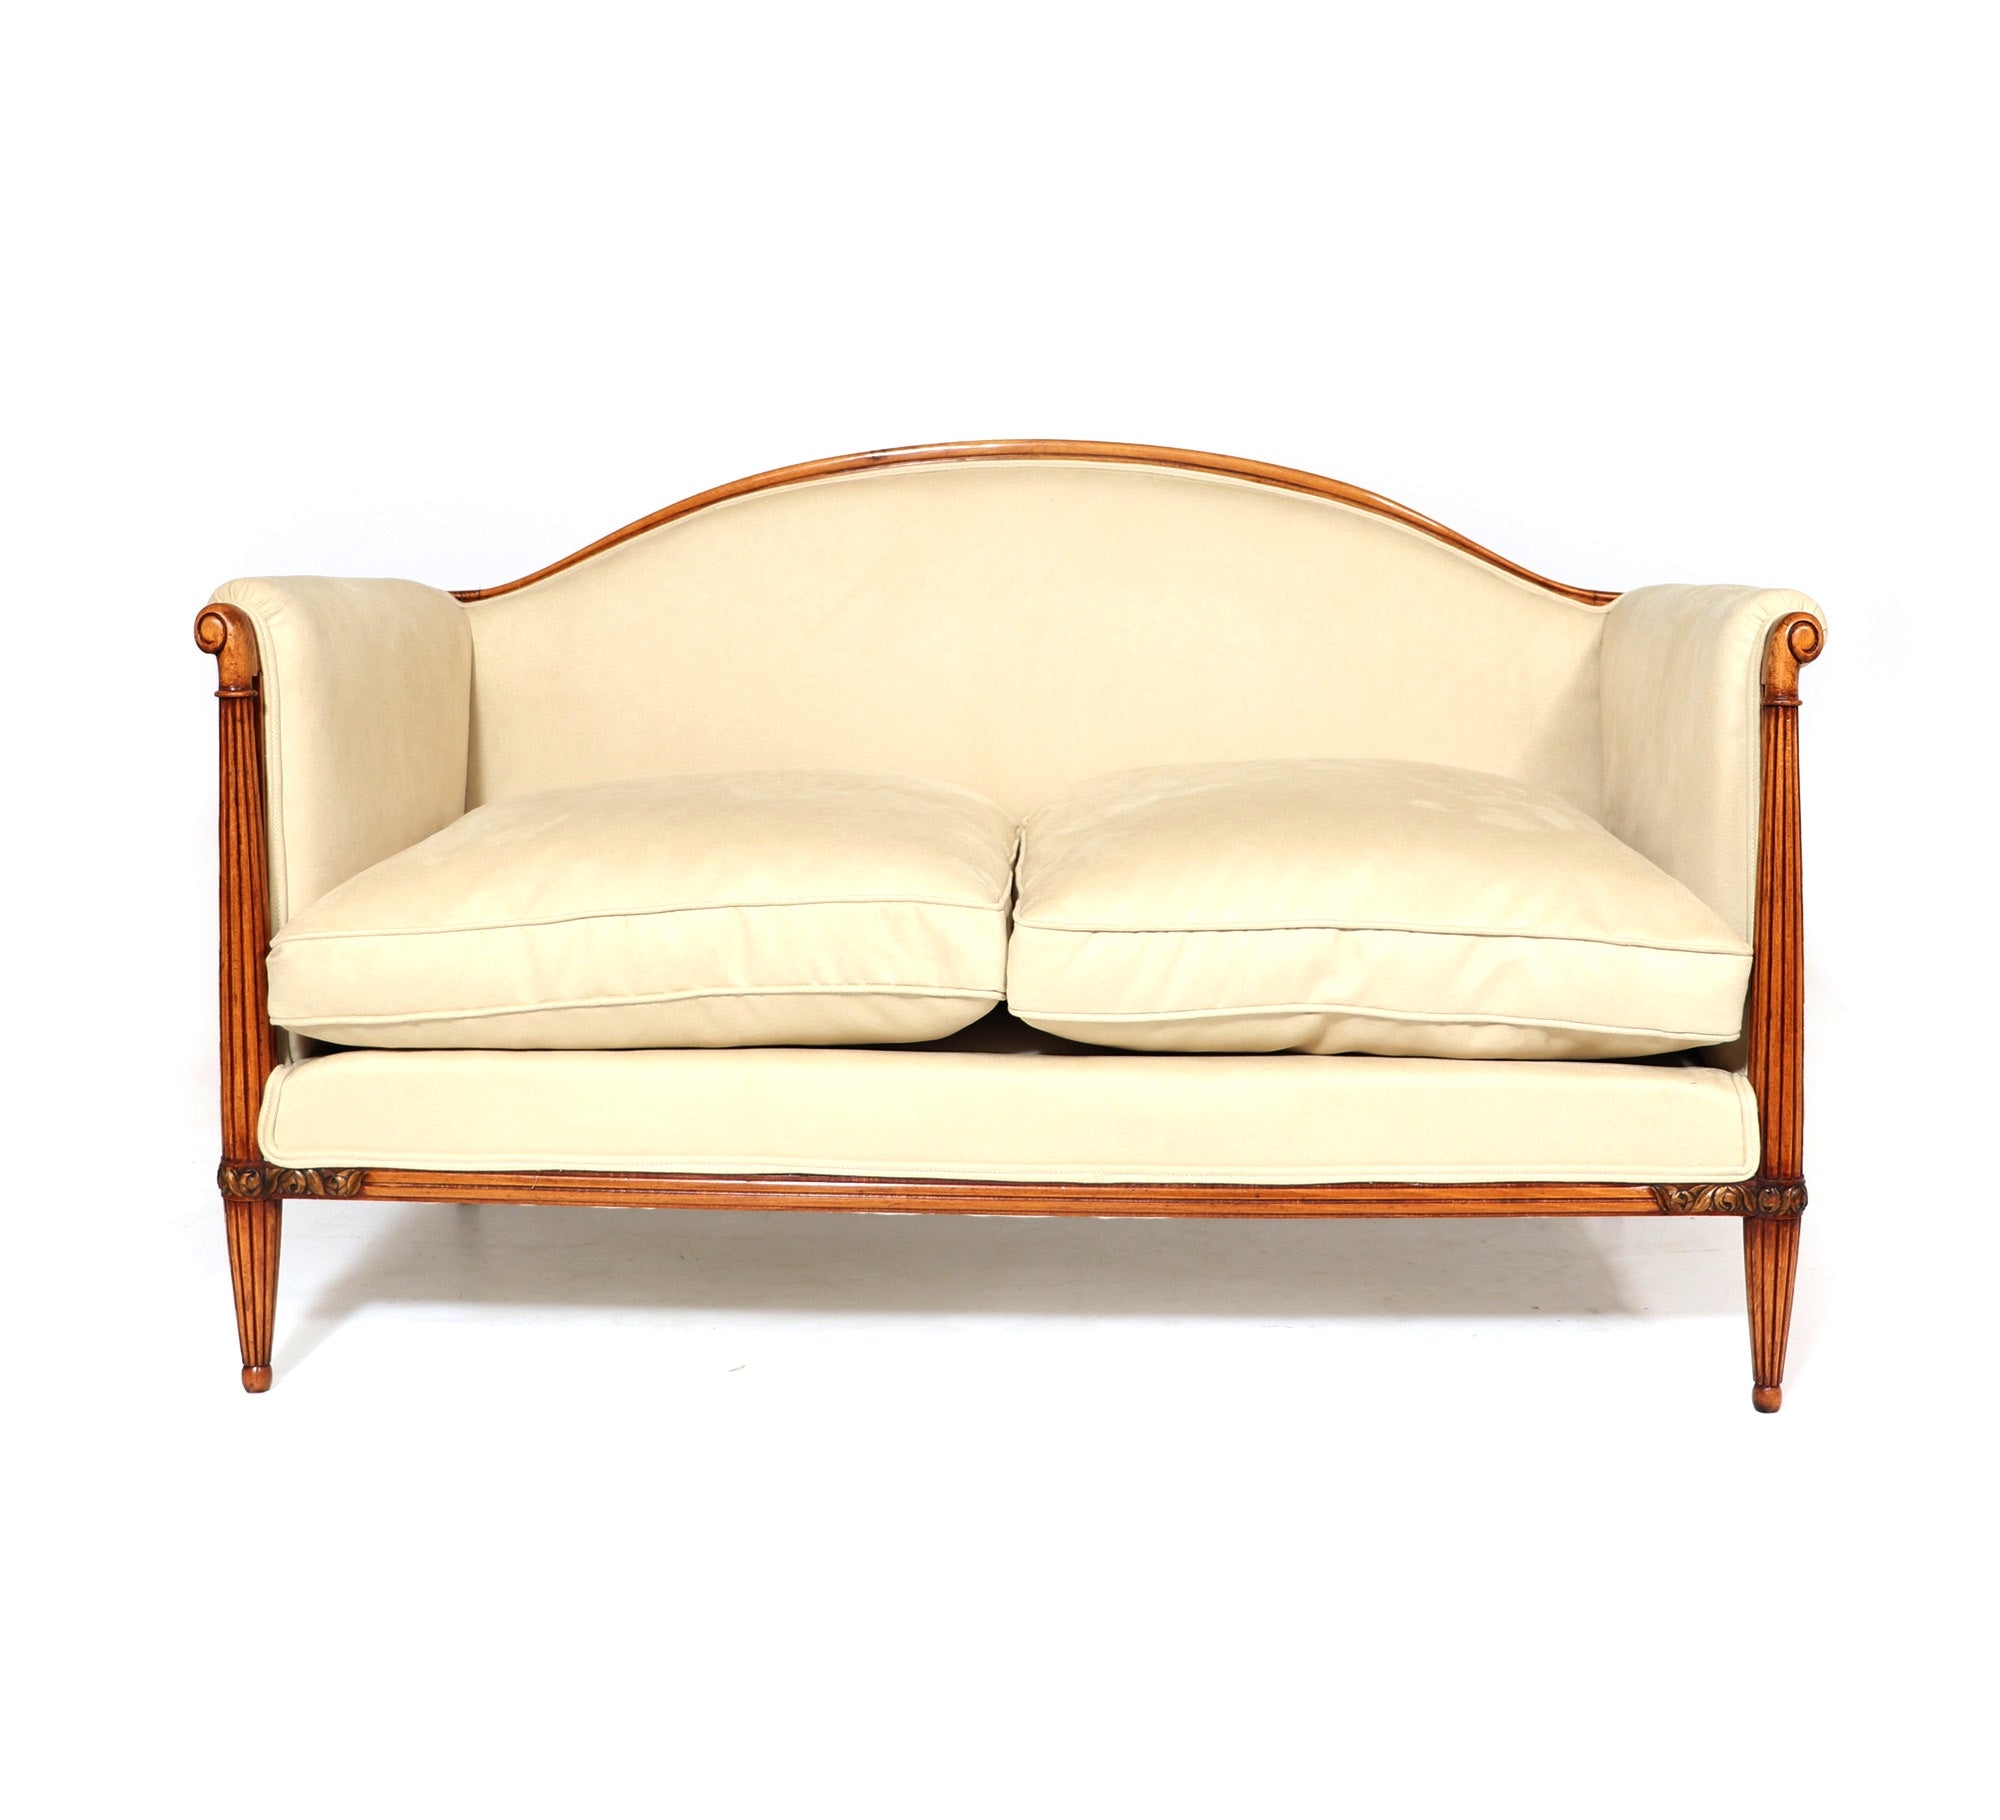 French Art Deco Sofa Maurice Dufrene – The Furniture Rooms